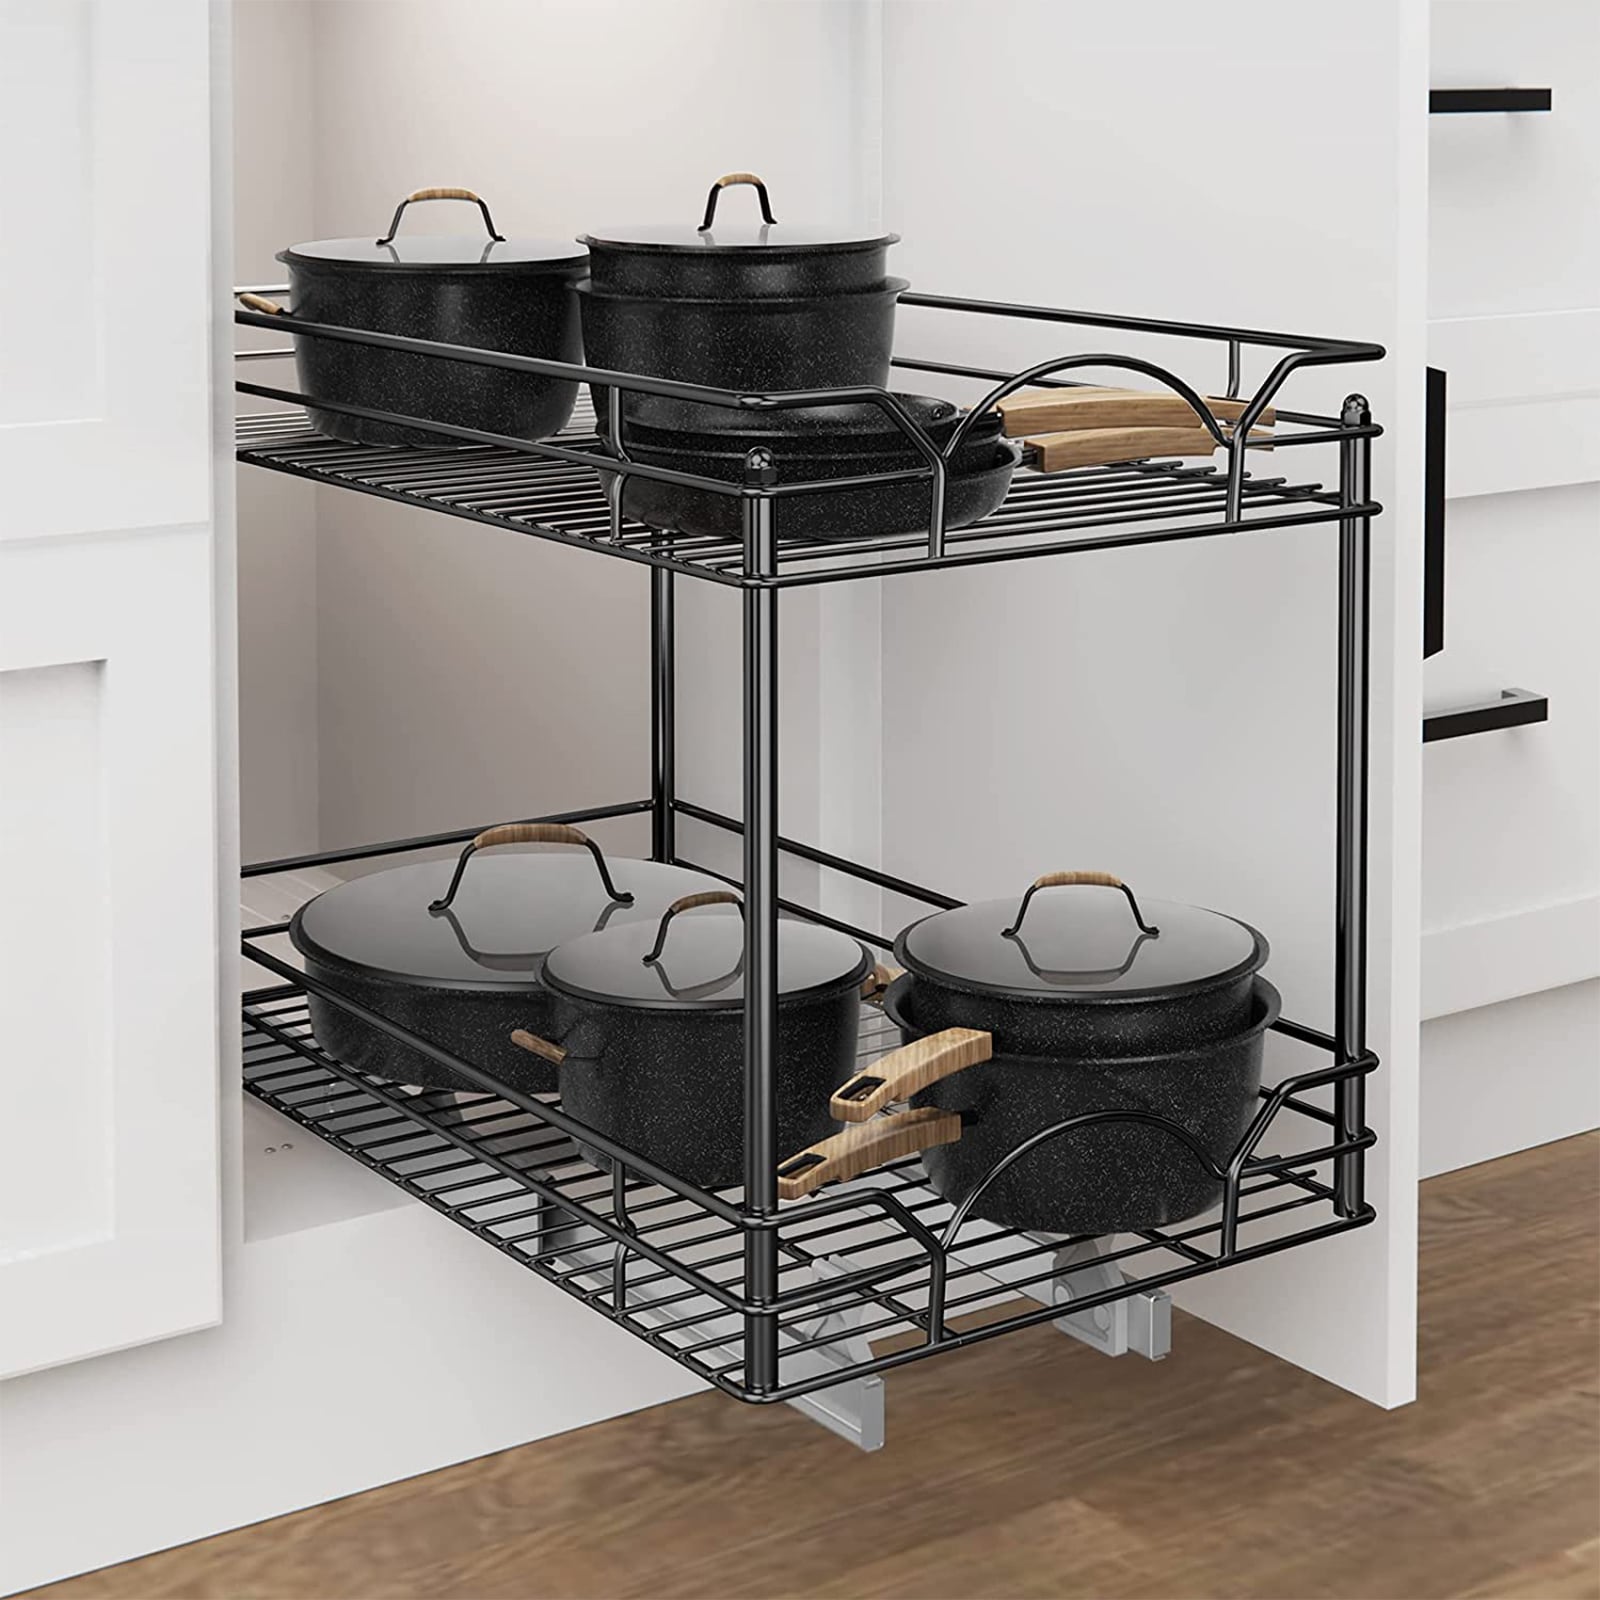 HomLux Pull Out Cabinet Organizer 14-in W x 16.4-in H x 18-in D